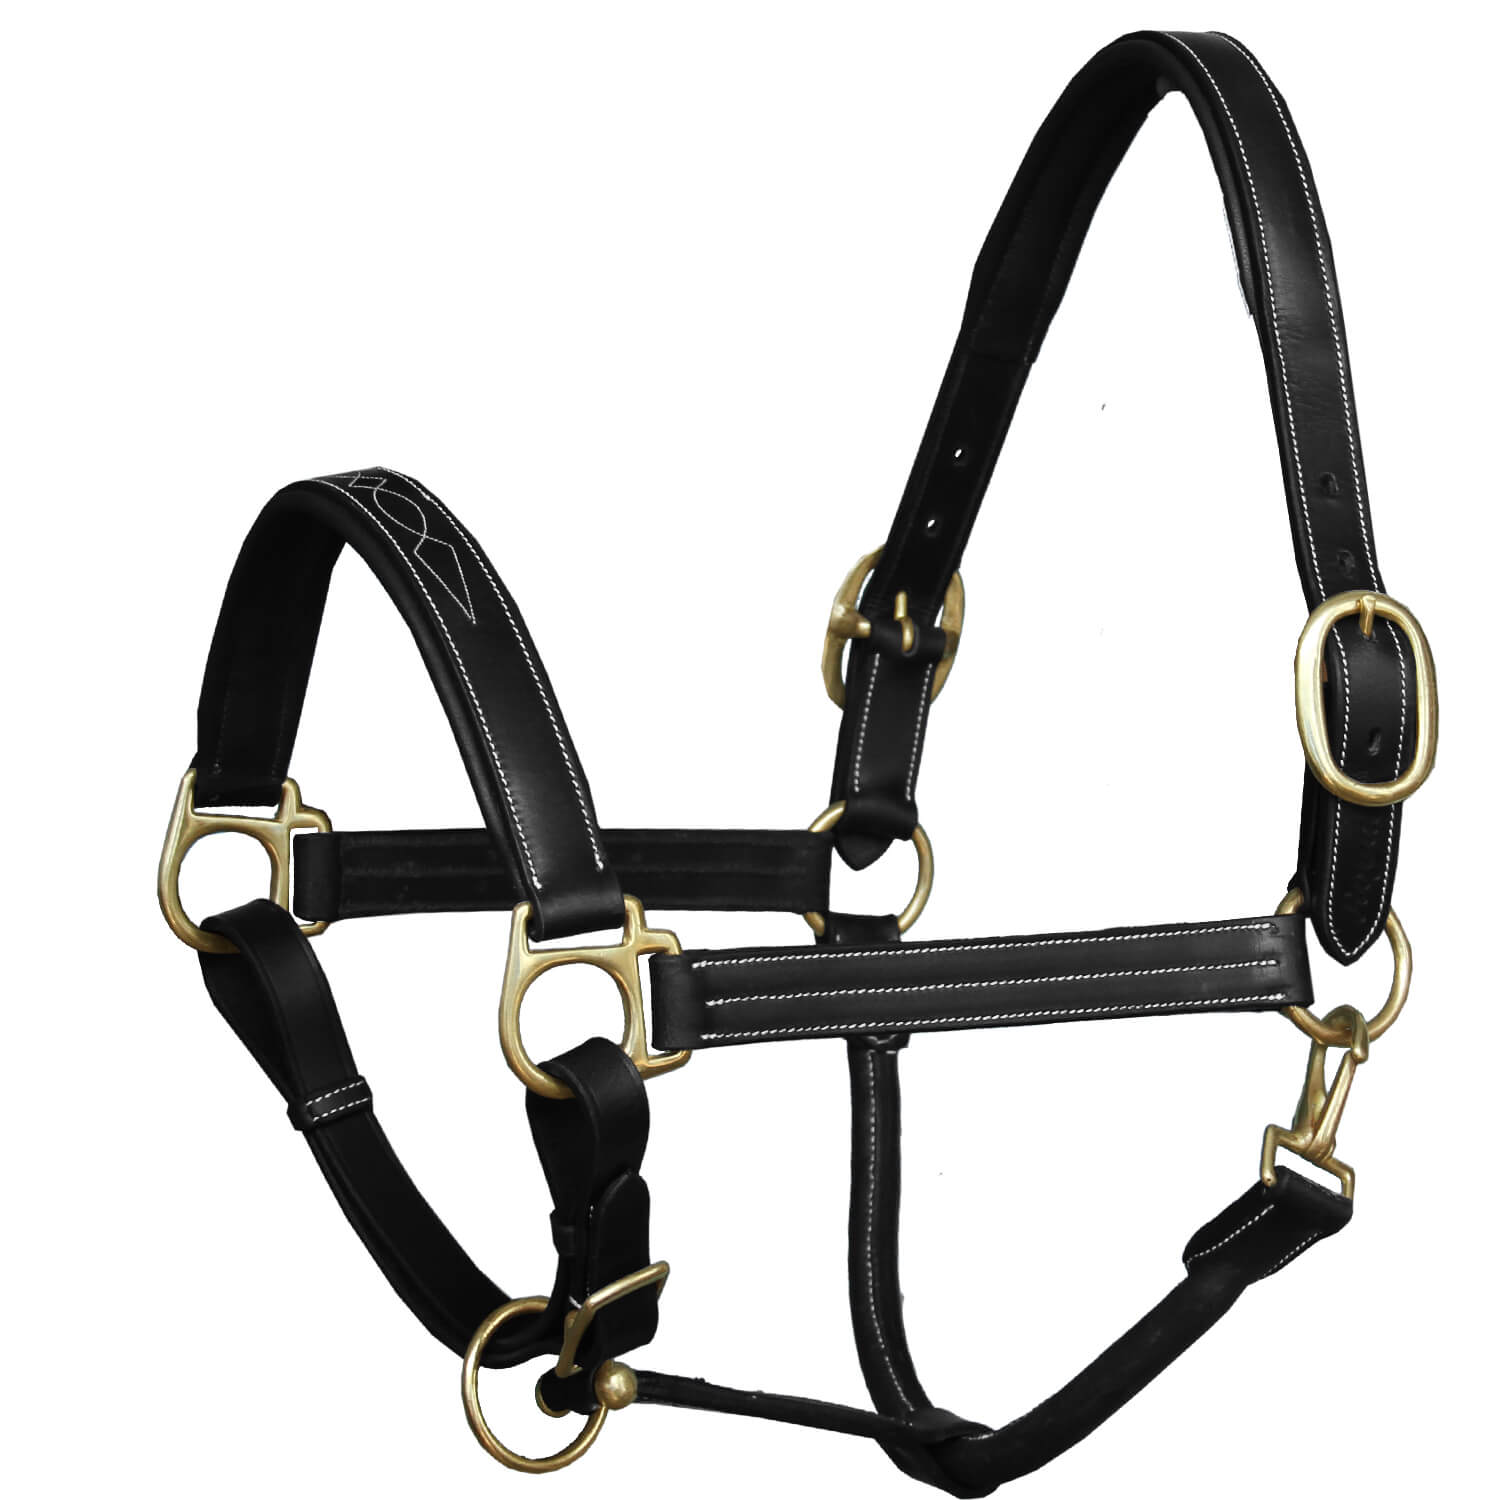 ExionPro Leather Horse Halter | Halters for Horses | Horse Halter Leather